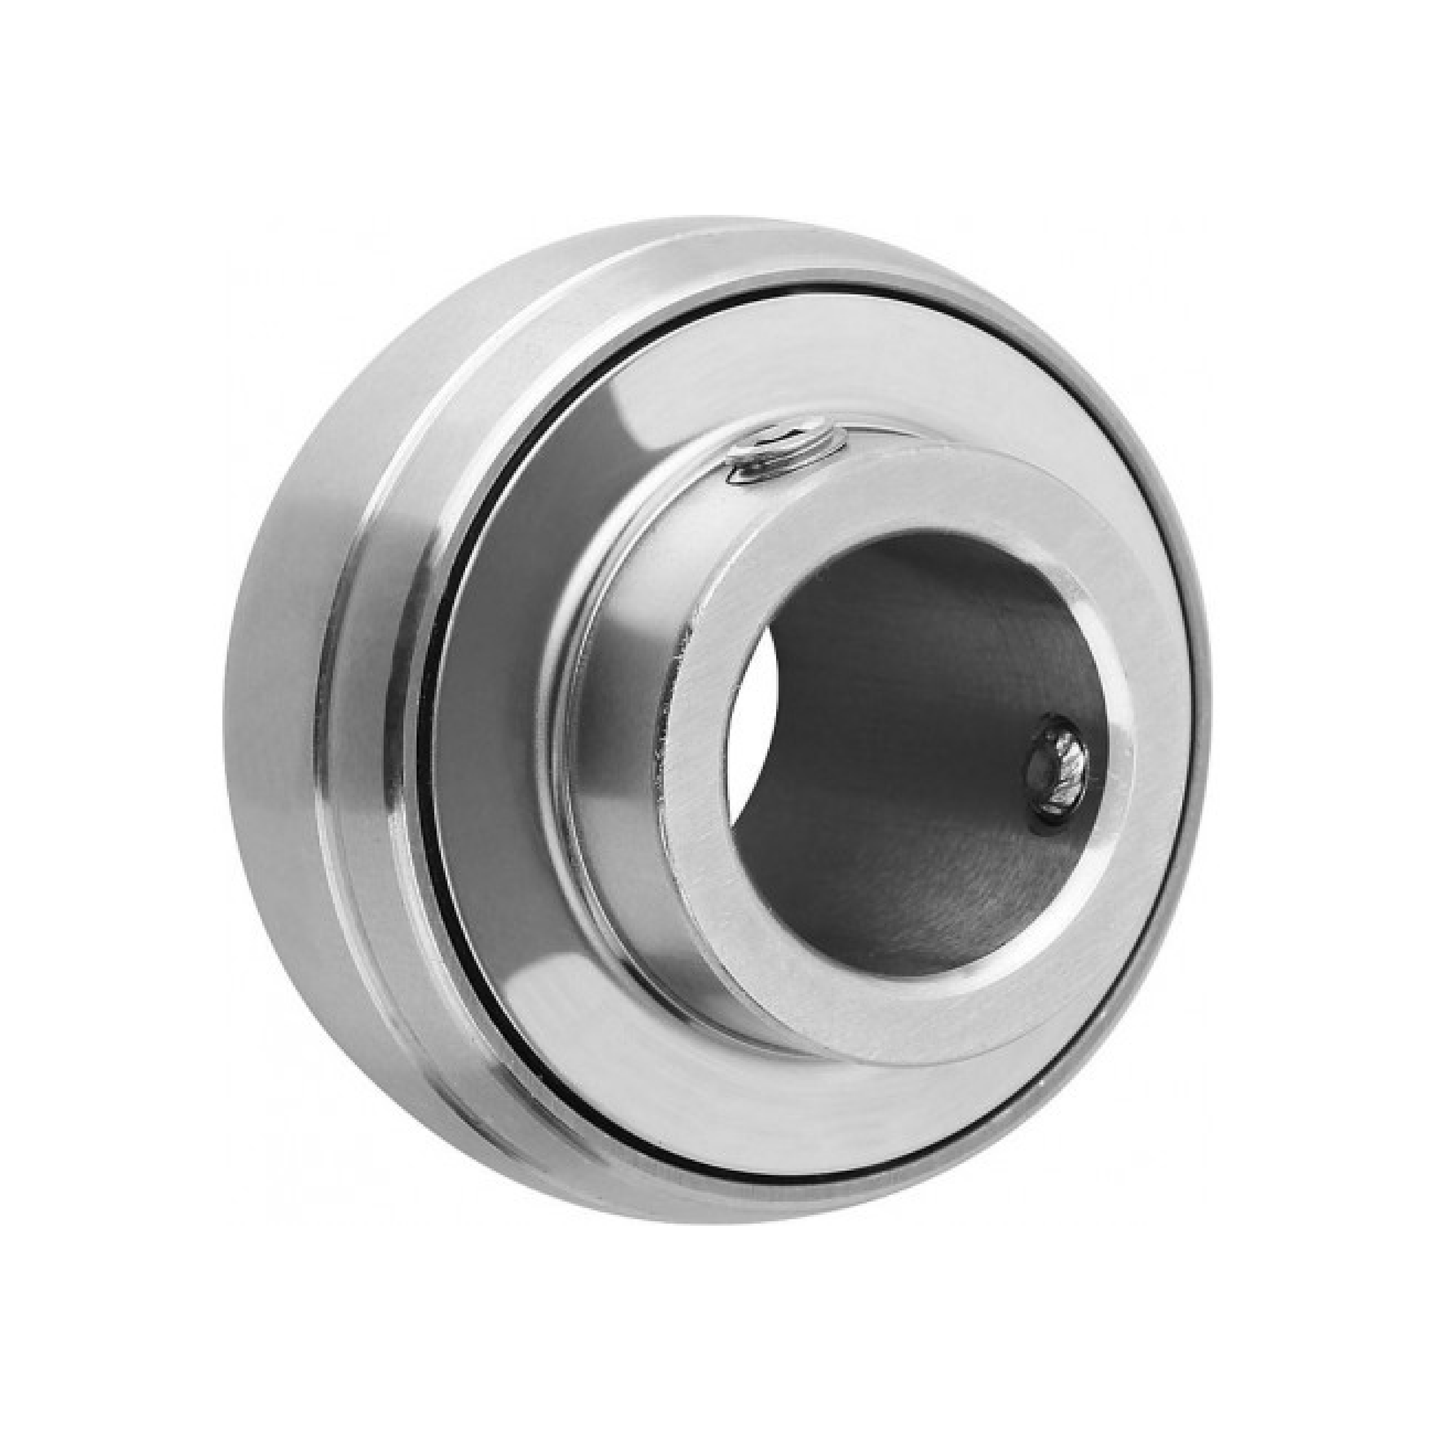 Bearing with locking ring 35x72x42.9 UC 207 stainless steel